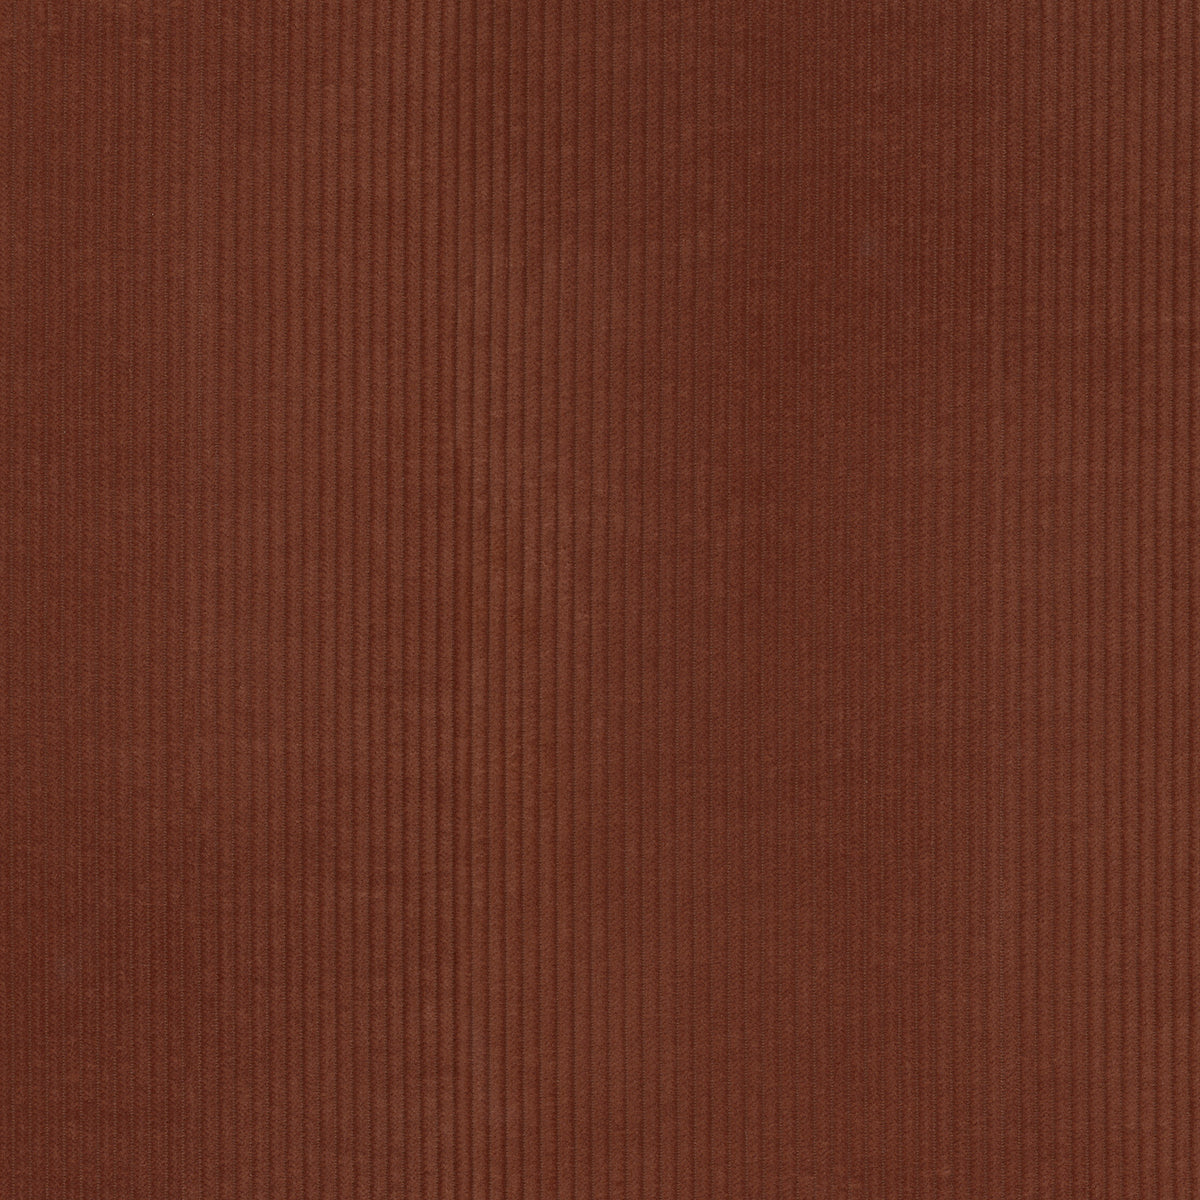 P/K Lifestyles Wales - Currant 412036 Upholstery Fabric